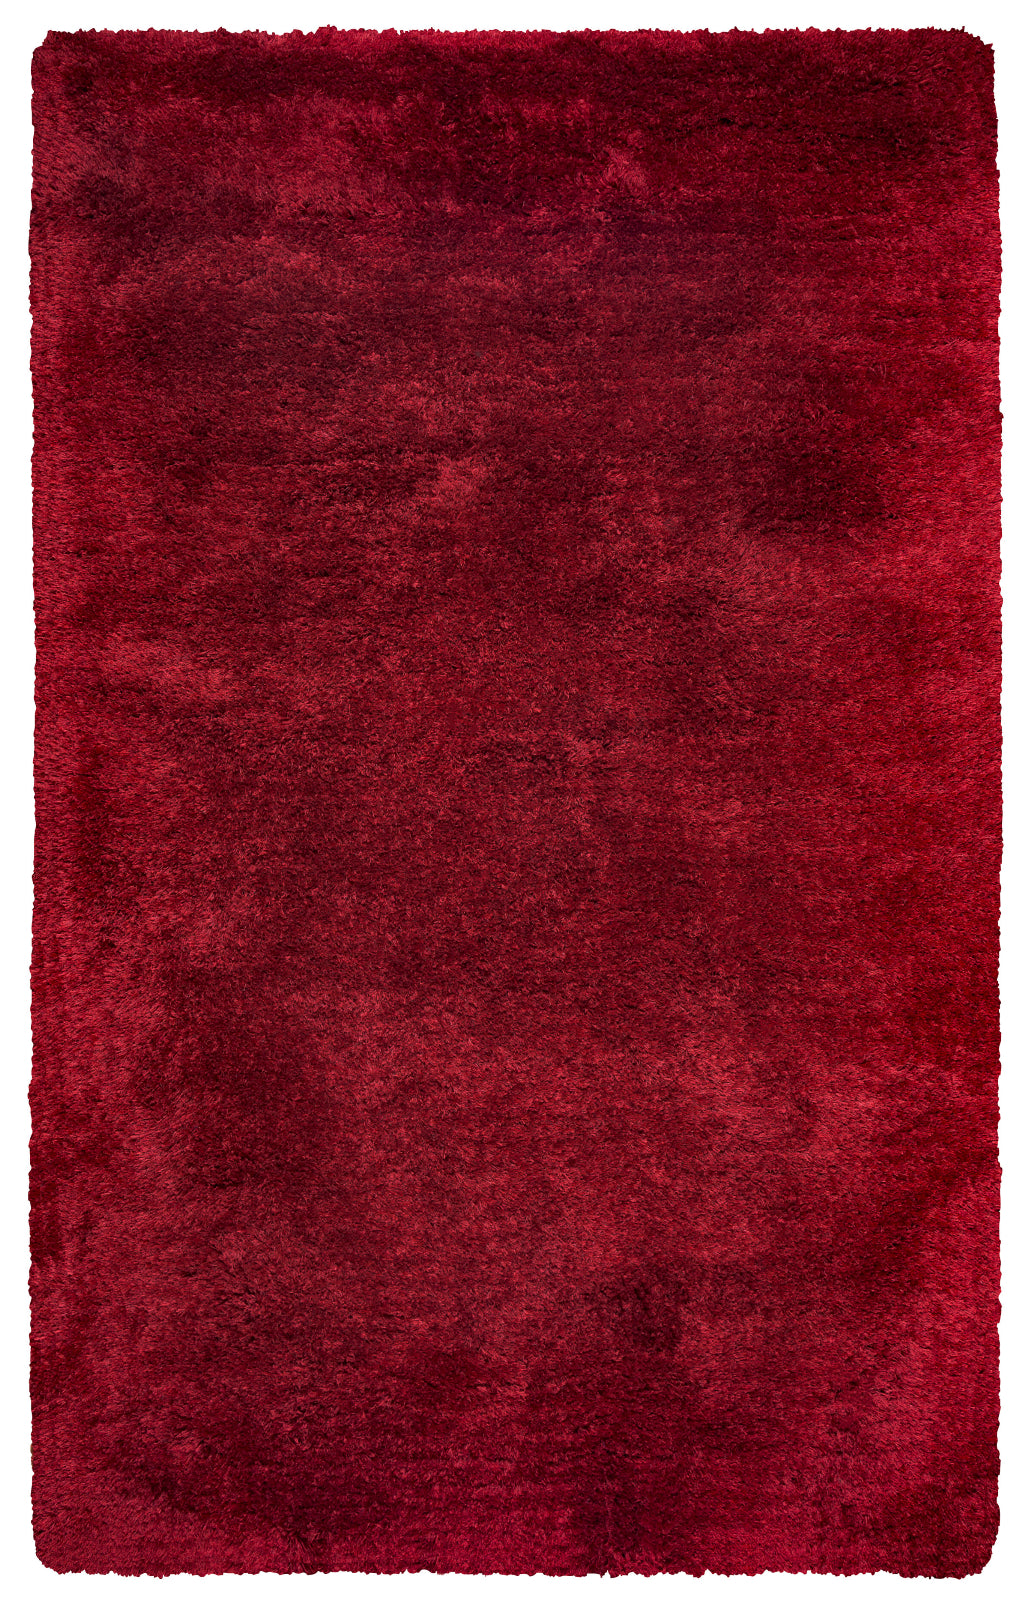 Rizzy Commons CO8362 red Area Rug main image